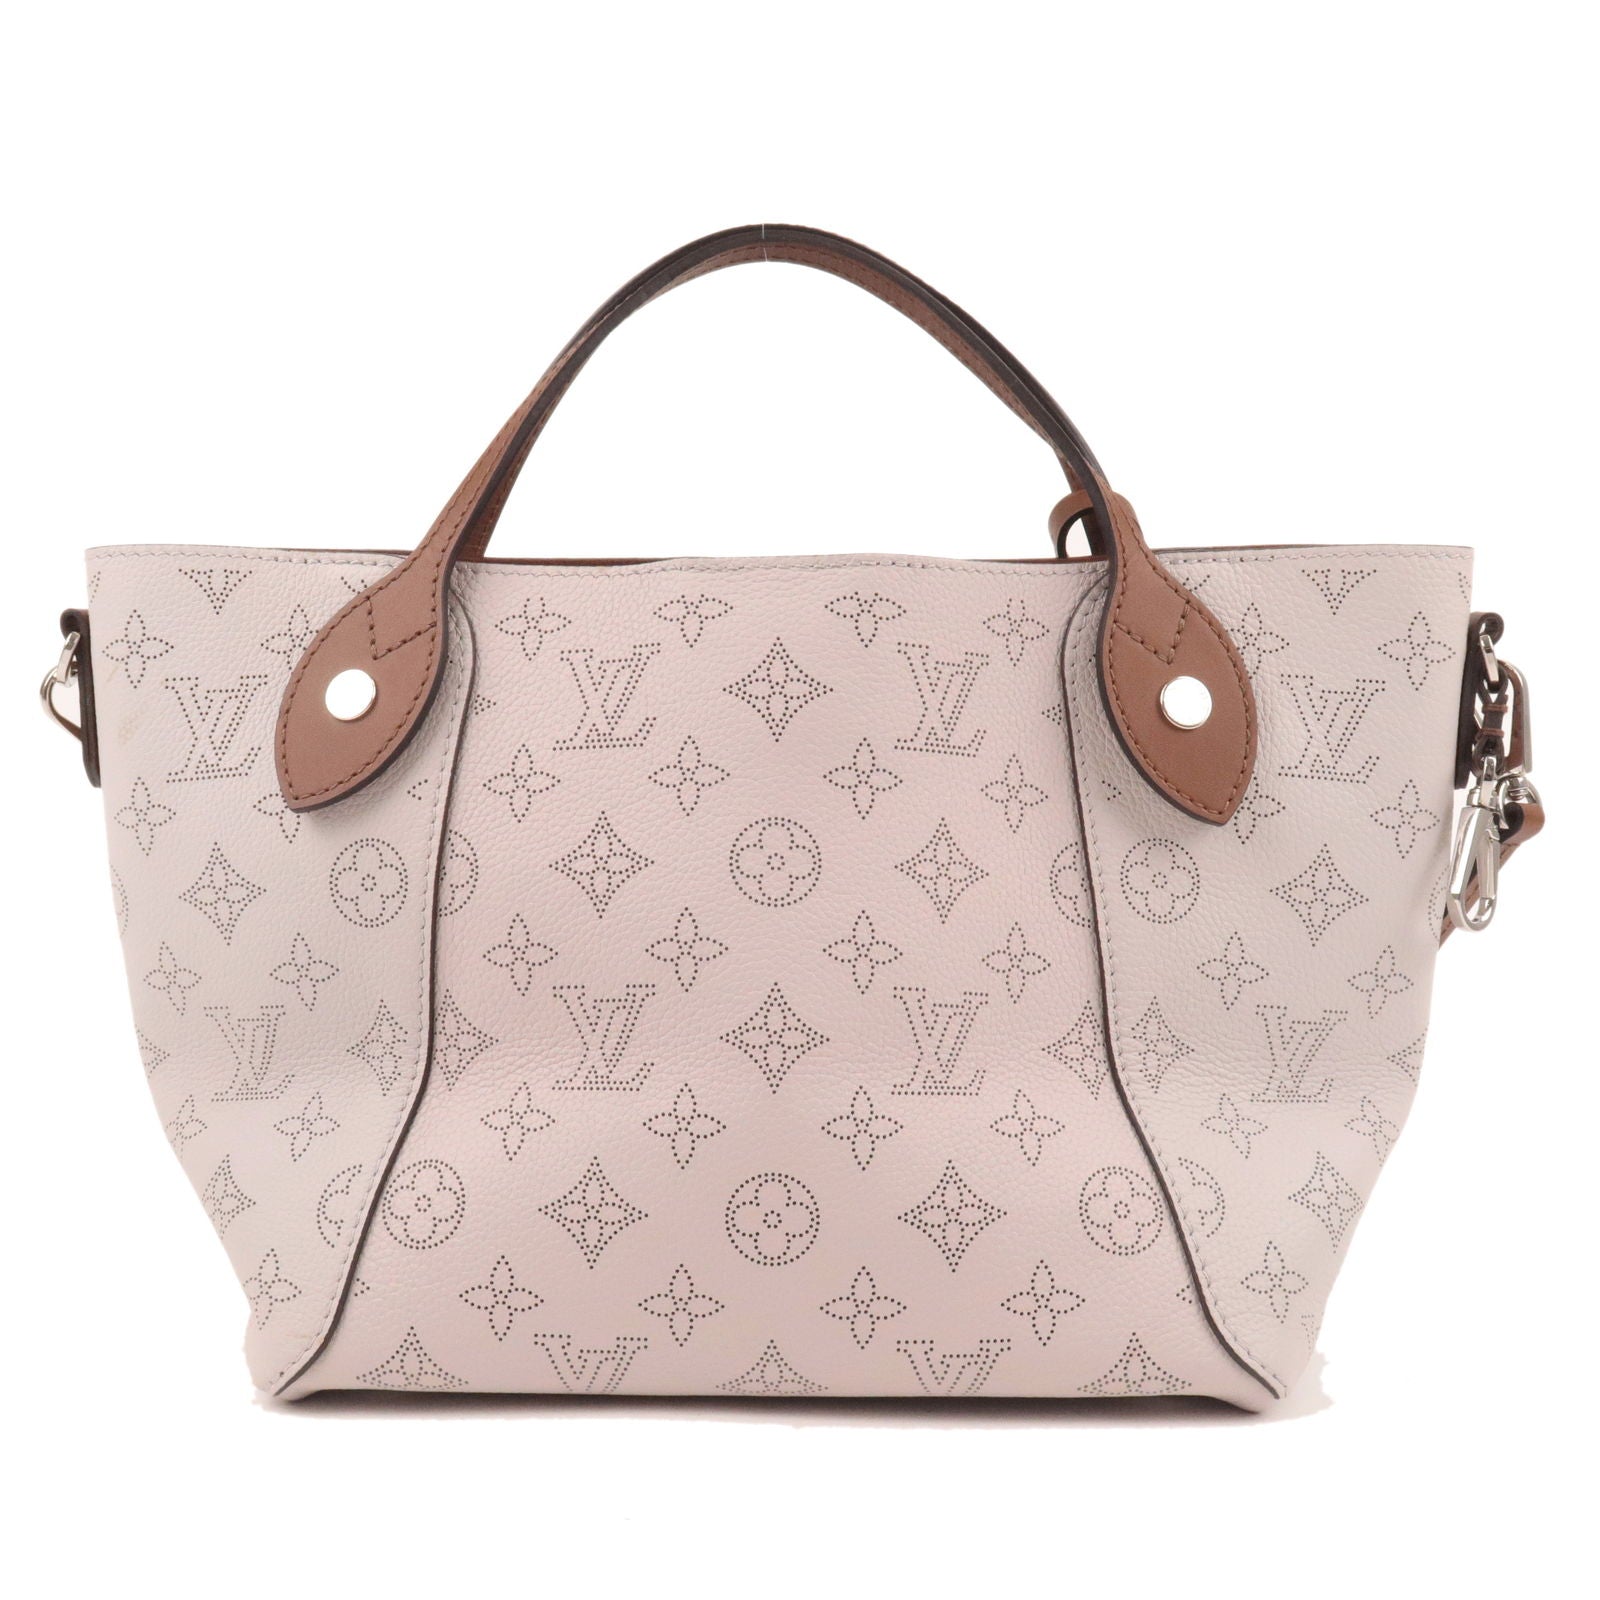 Pre-owned Louis Vuitton Mahina Leather Tote In Brown